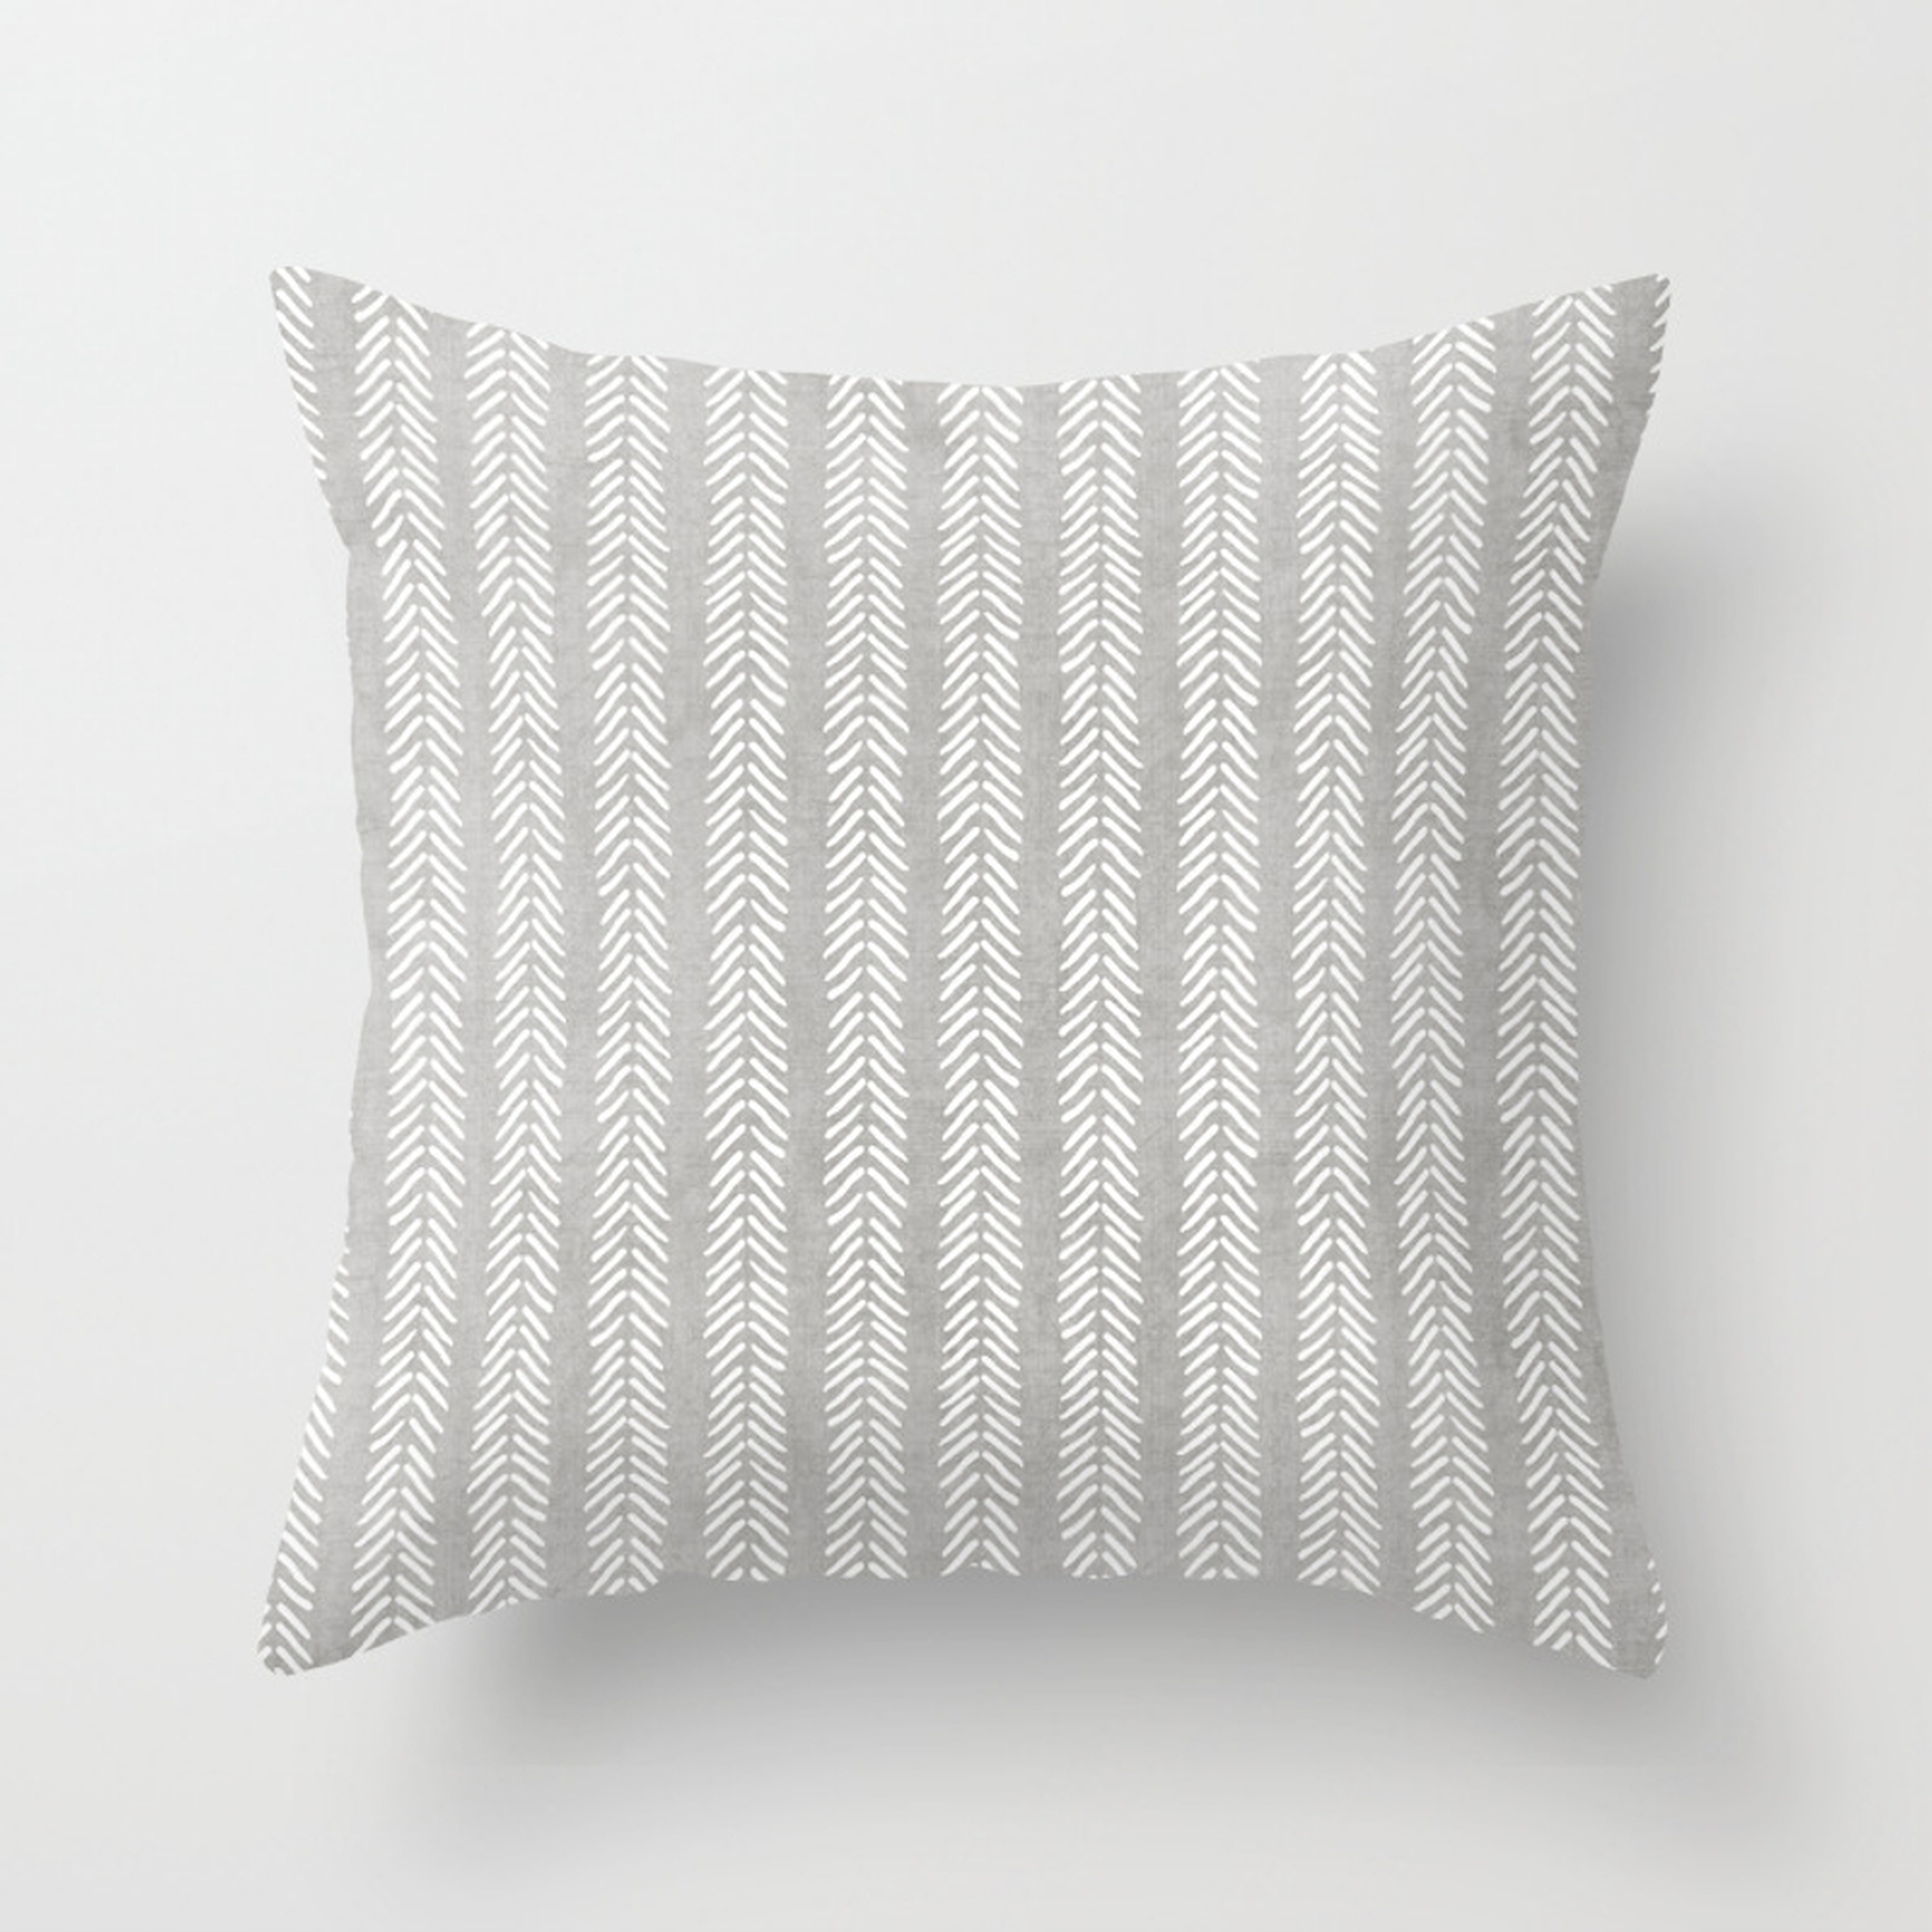 Small Grey Arrows Throw Pillow by House Of Haha - Cover (20" x 20") With Pillow Insert - Indoor Pillow - Society6